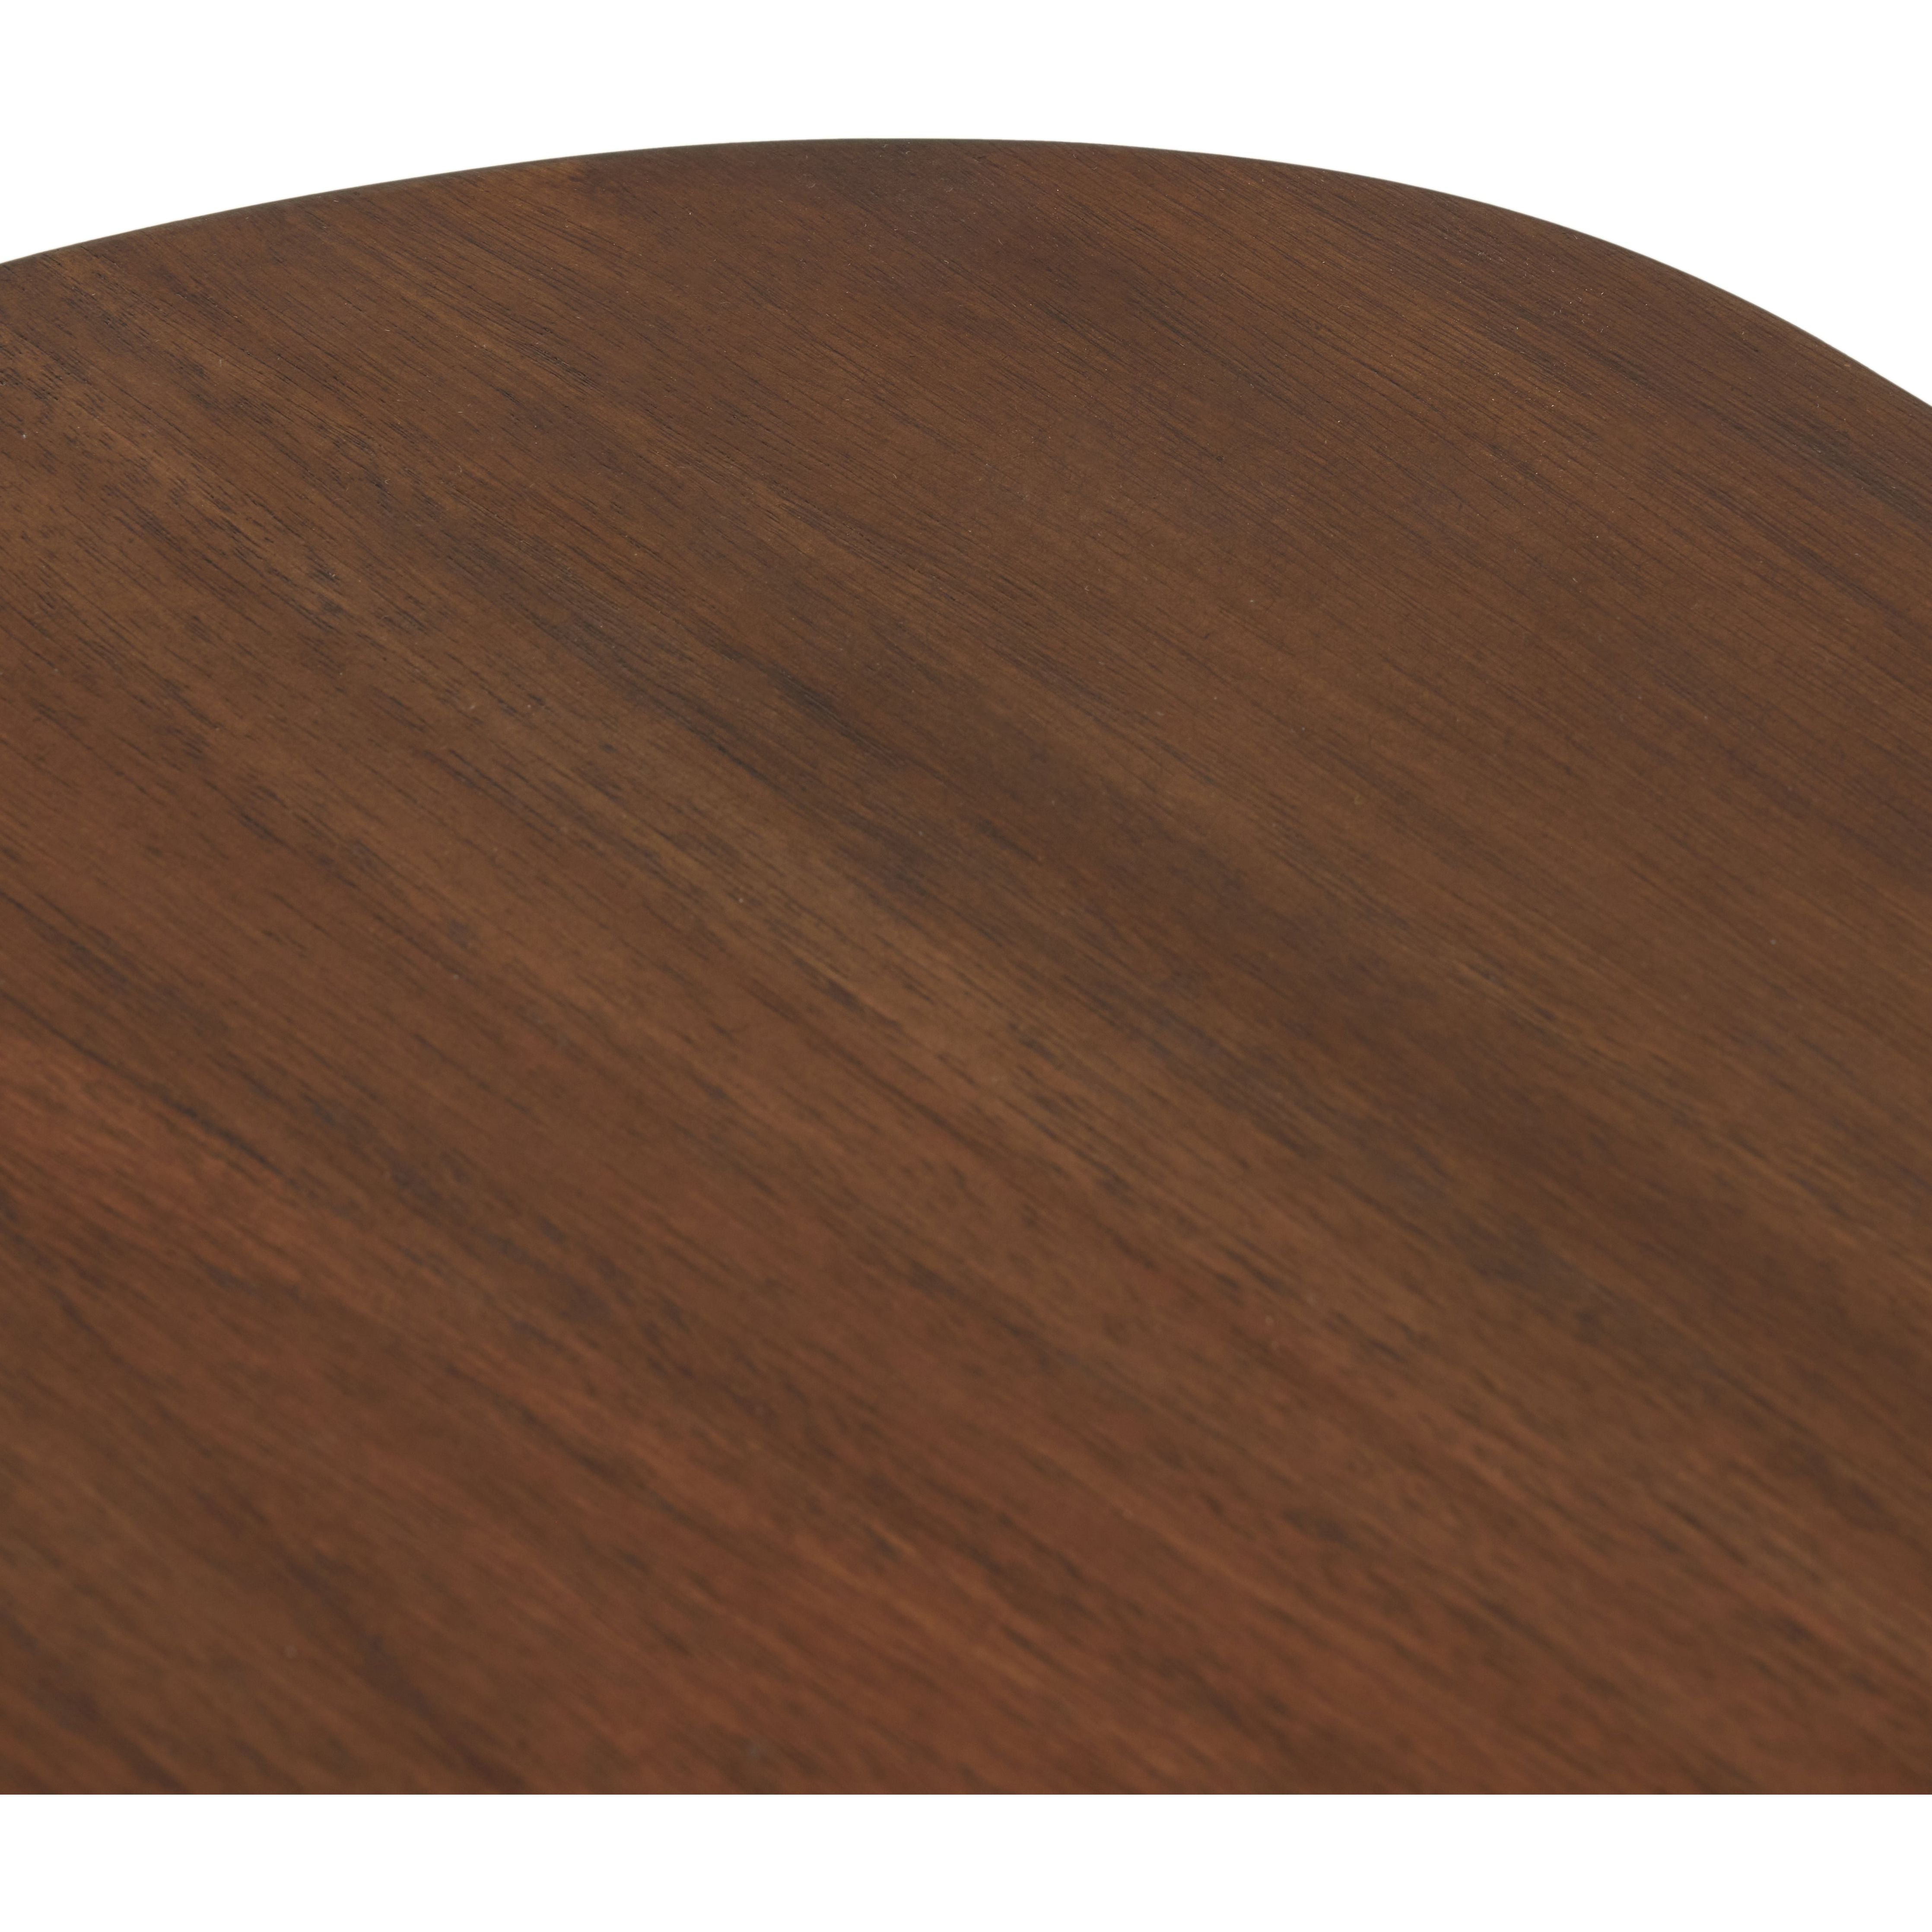 Seasoned brown acacia forms a curved pedestal base, bringing gentle curves to a classic nightstand shape. Amethyst Home provides interior design, new construction, custom furniture, and area rugs in the Scottsdale metro area.